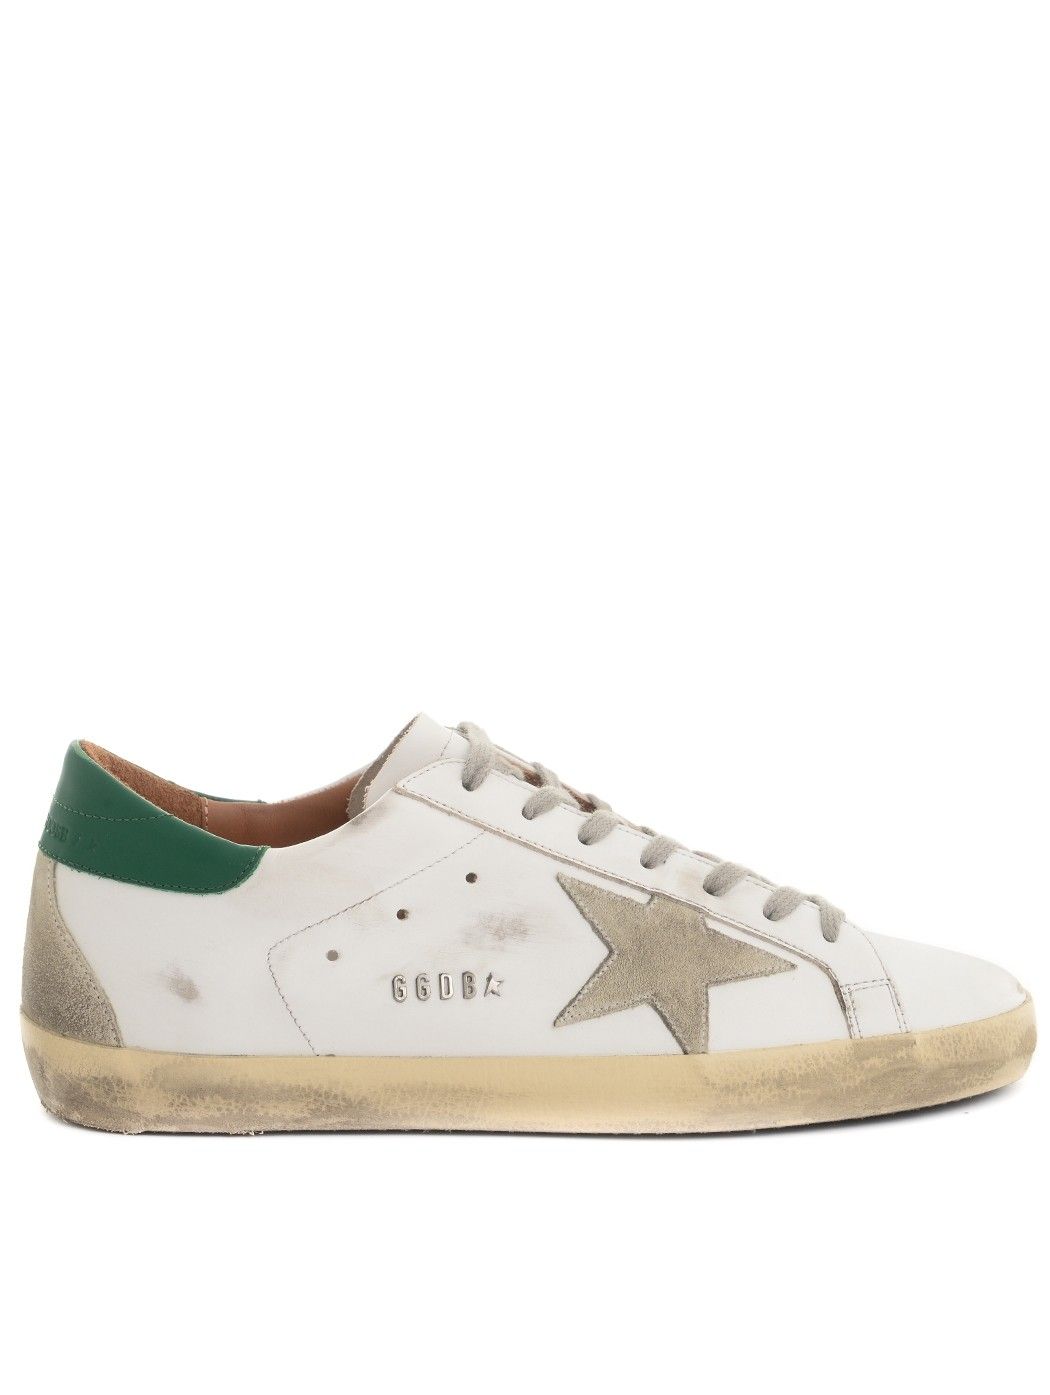  MAN SHOES,CHURCH'S SHOES,CHURCH'S LOAFER SHOES,GOLDEN GOOSE SNEAKERS,GOLDEN GOOSE SHOES,DIADORA HERITAGE SNEAKERS  GOLDEN GOOSE GMF00102-F002180